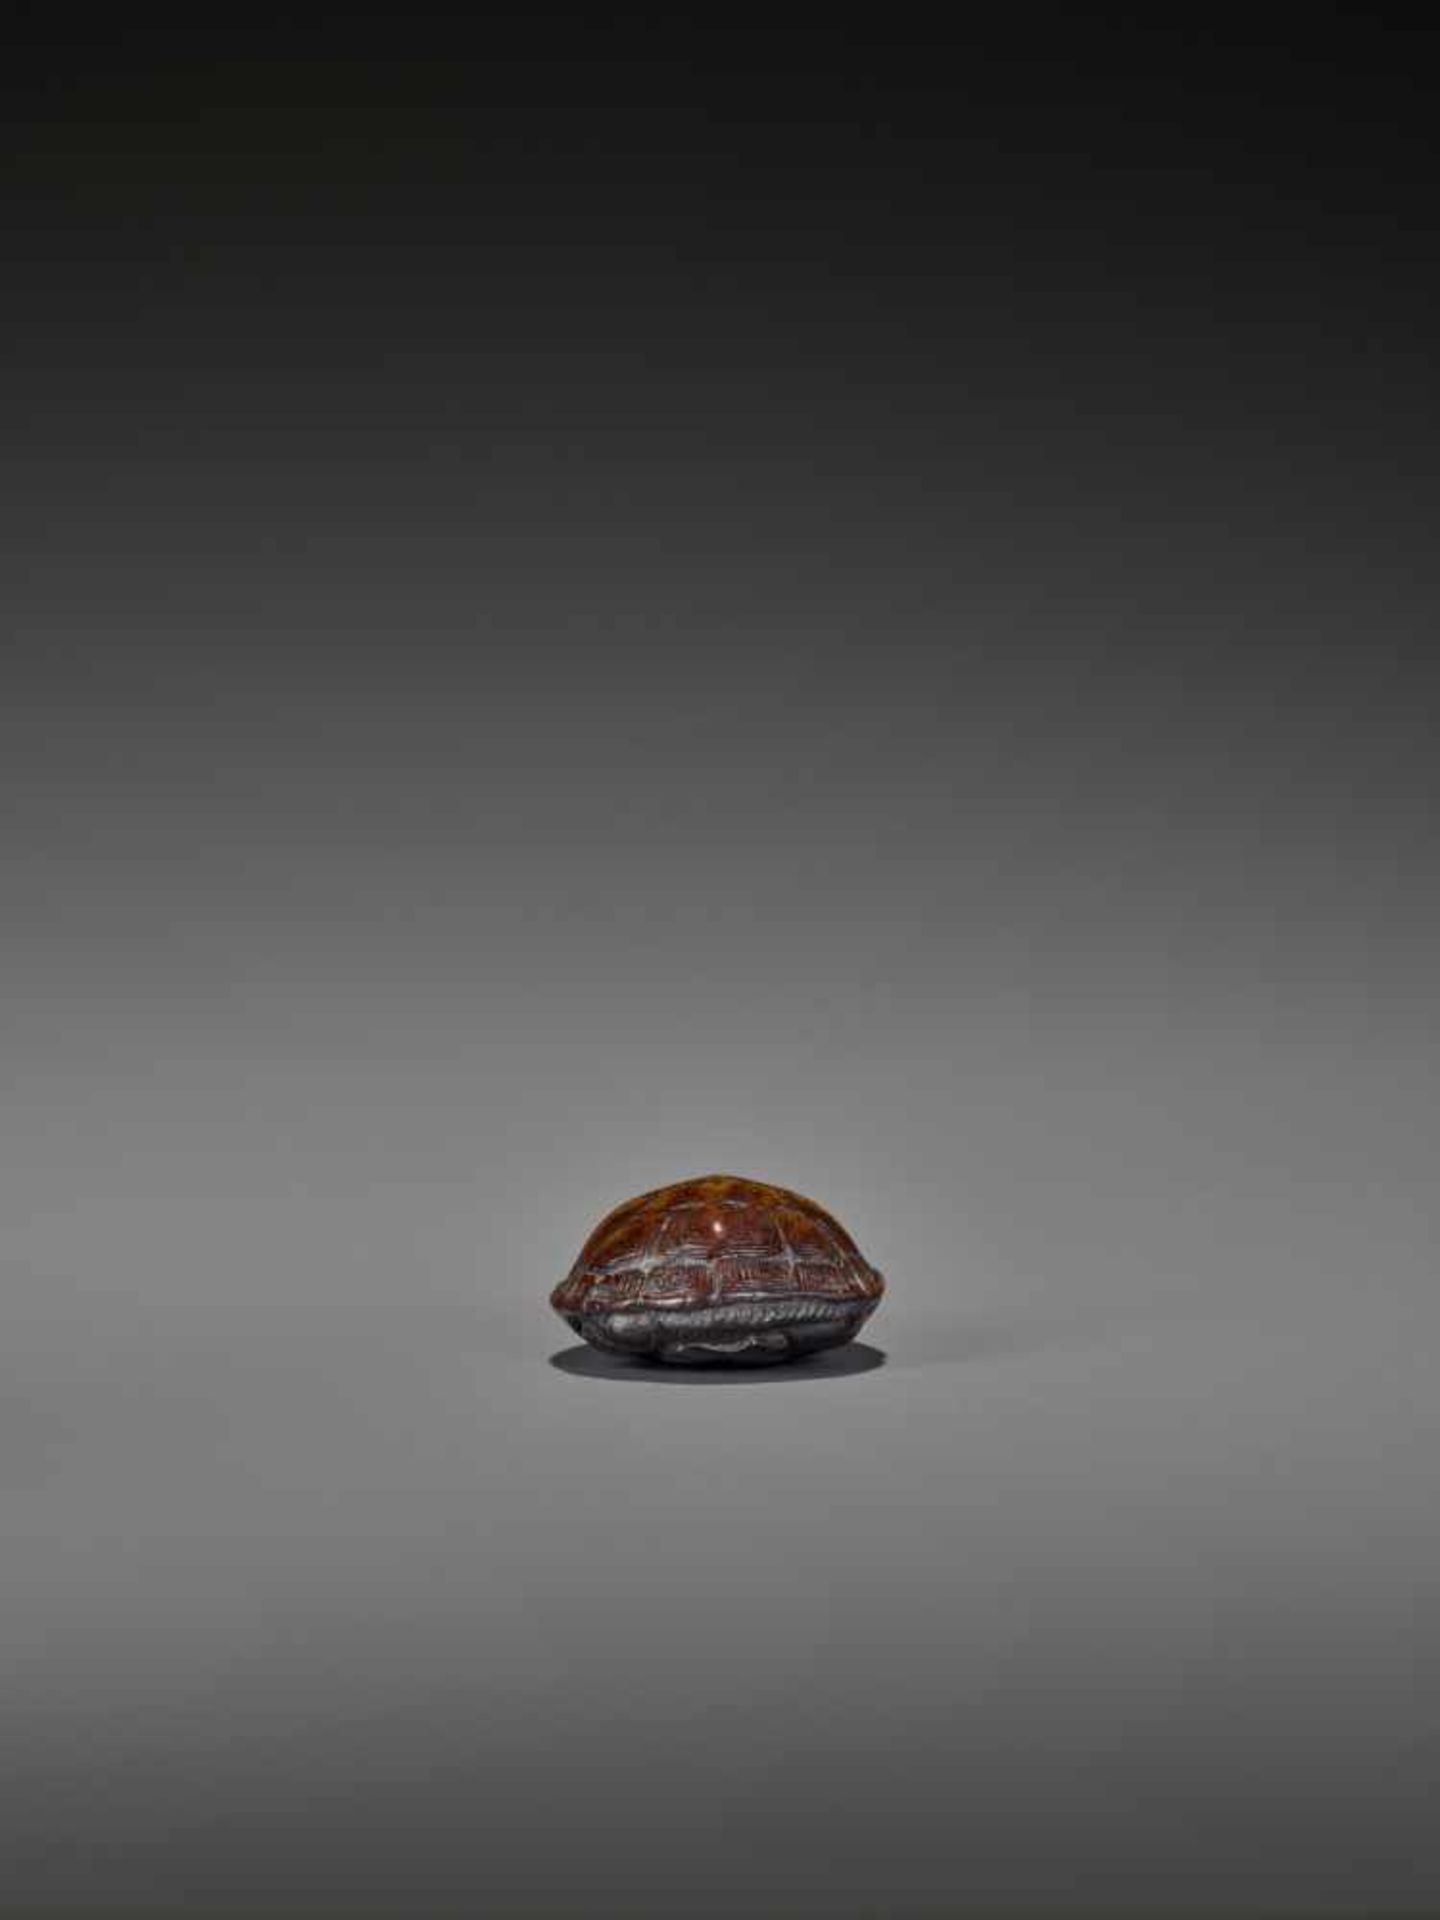 A WOOD NETSUKE OF A RETRACTED TORTOISE UnsignedJapan, 18th century, Edo period (1615-1868)This early - Image 7 of 10